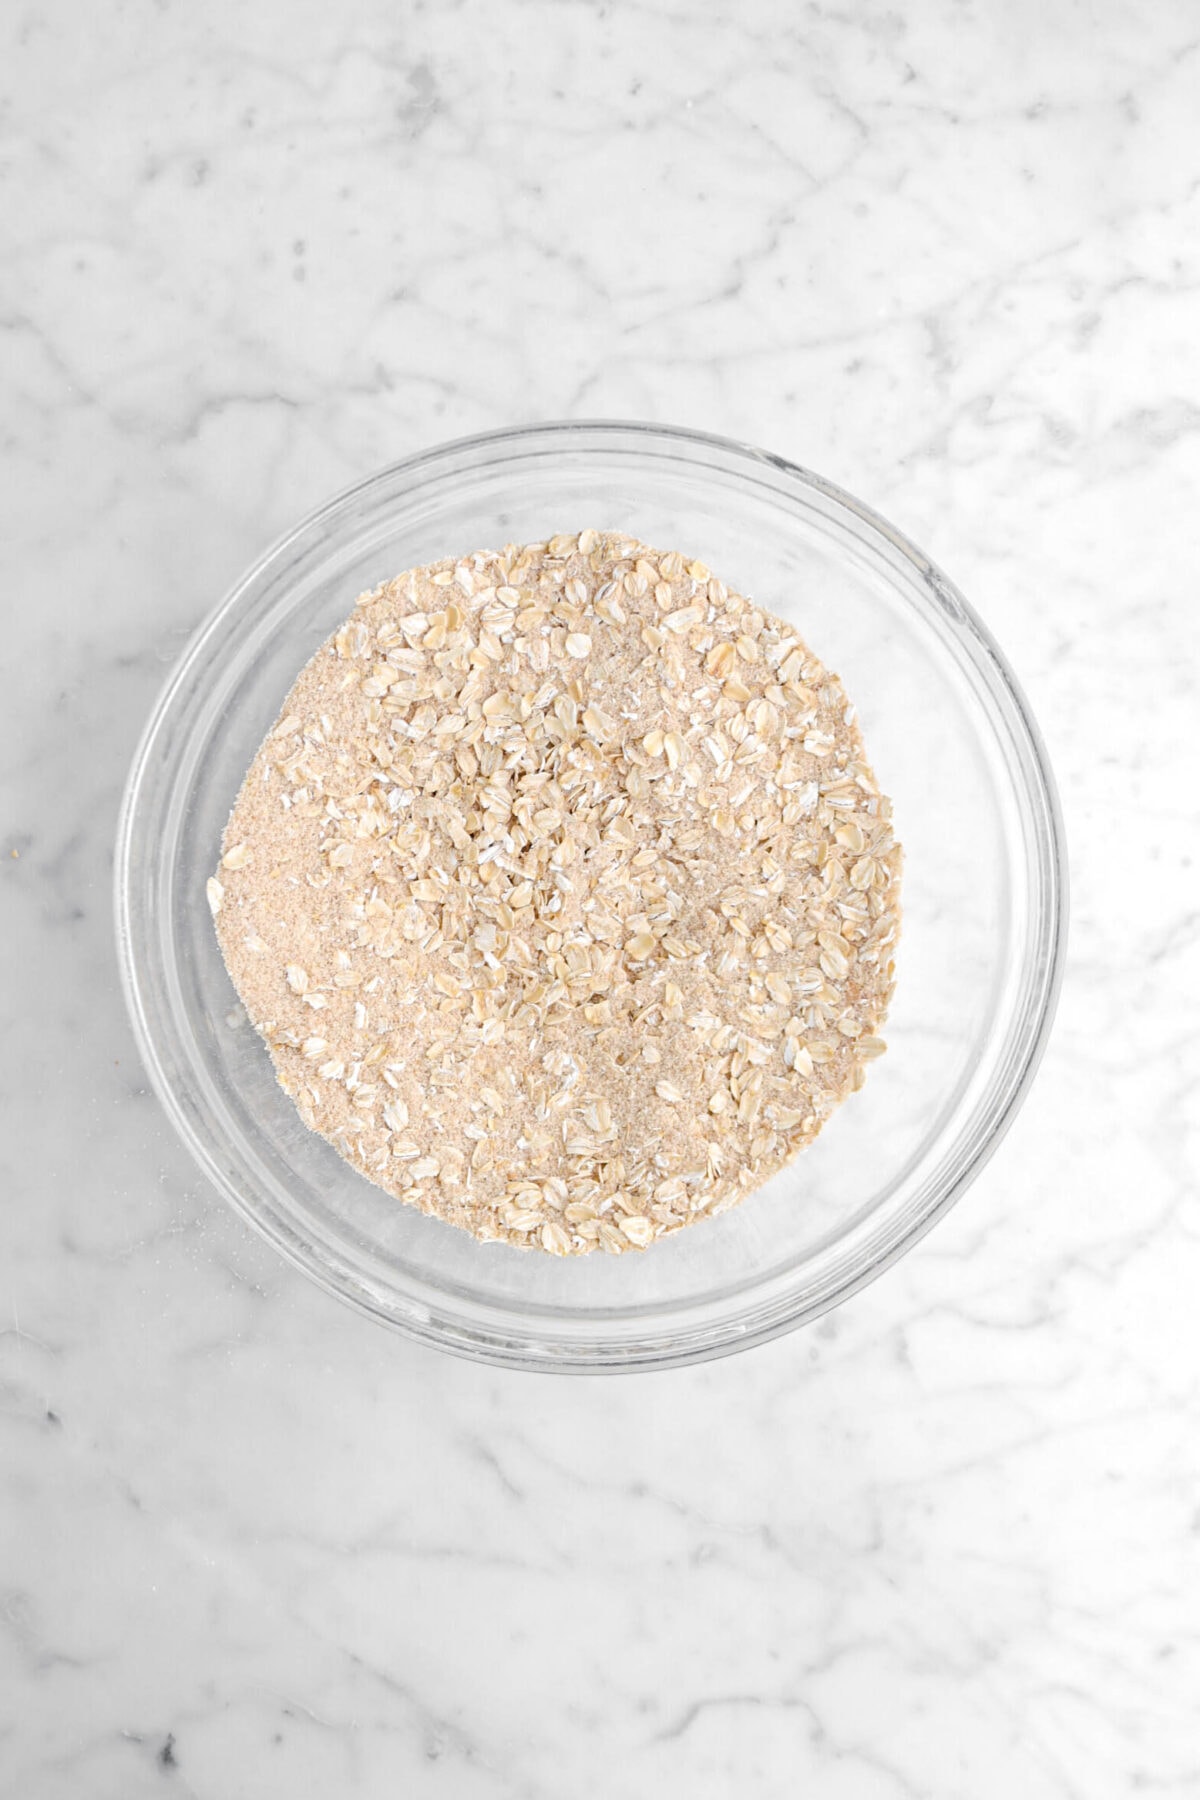 oats and sugar mixture whisked in glass bowl.